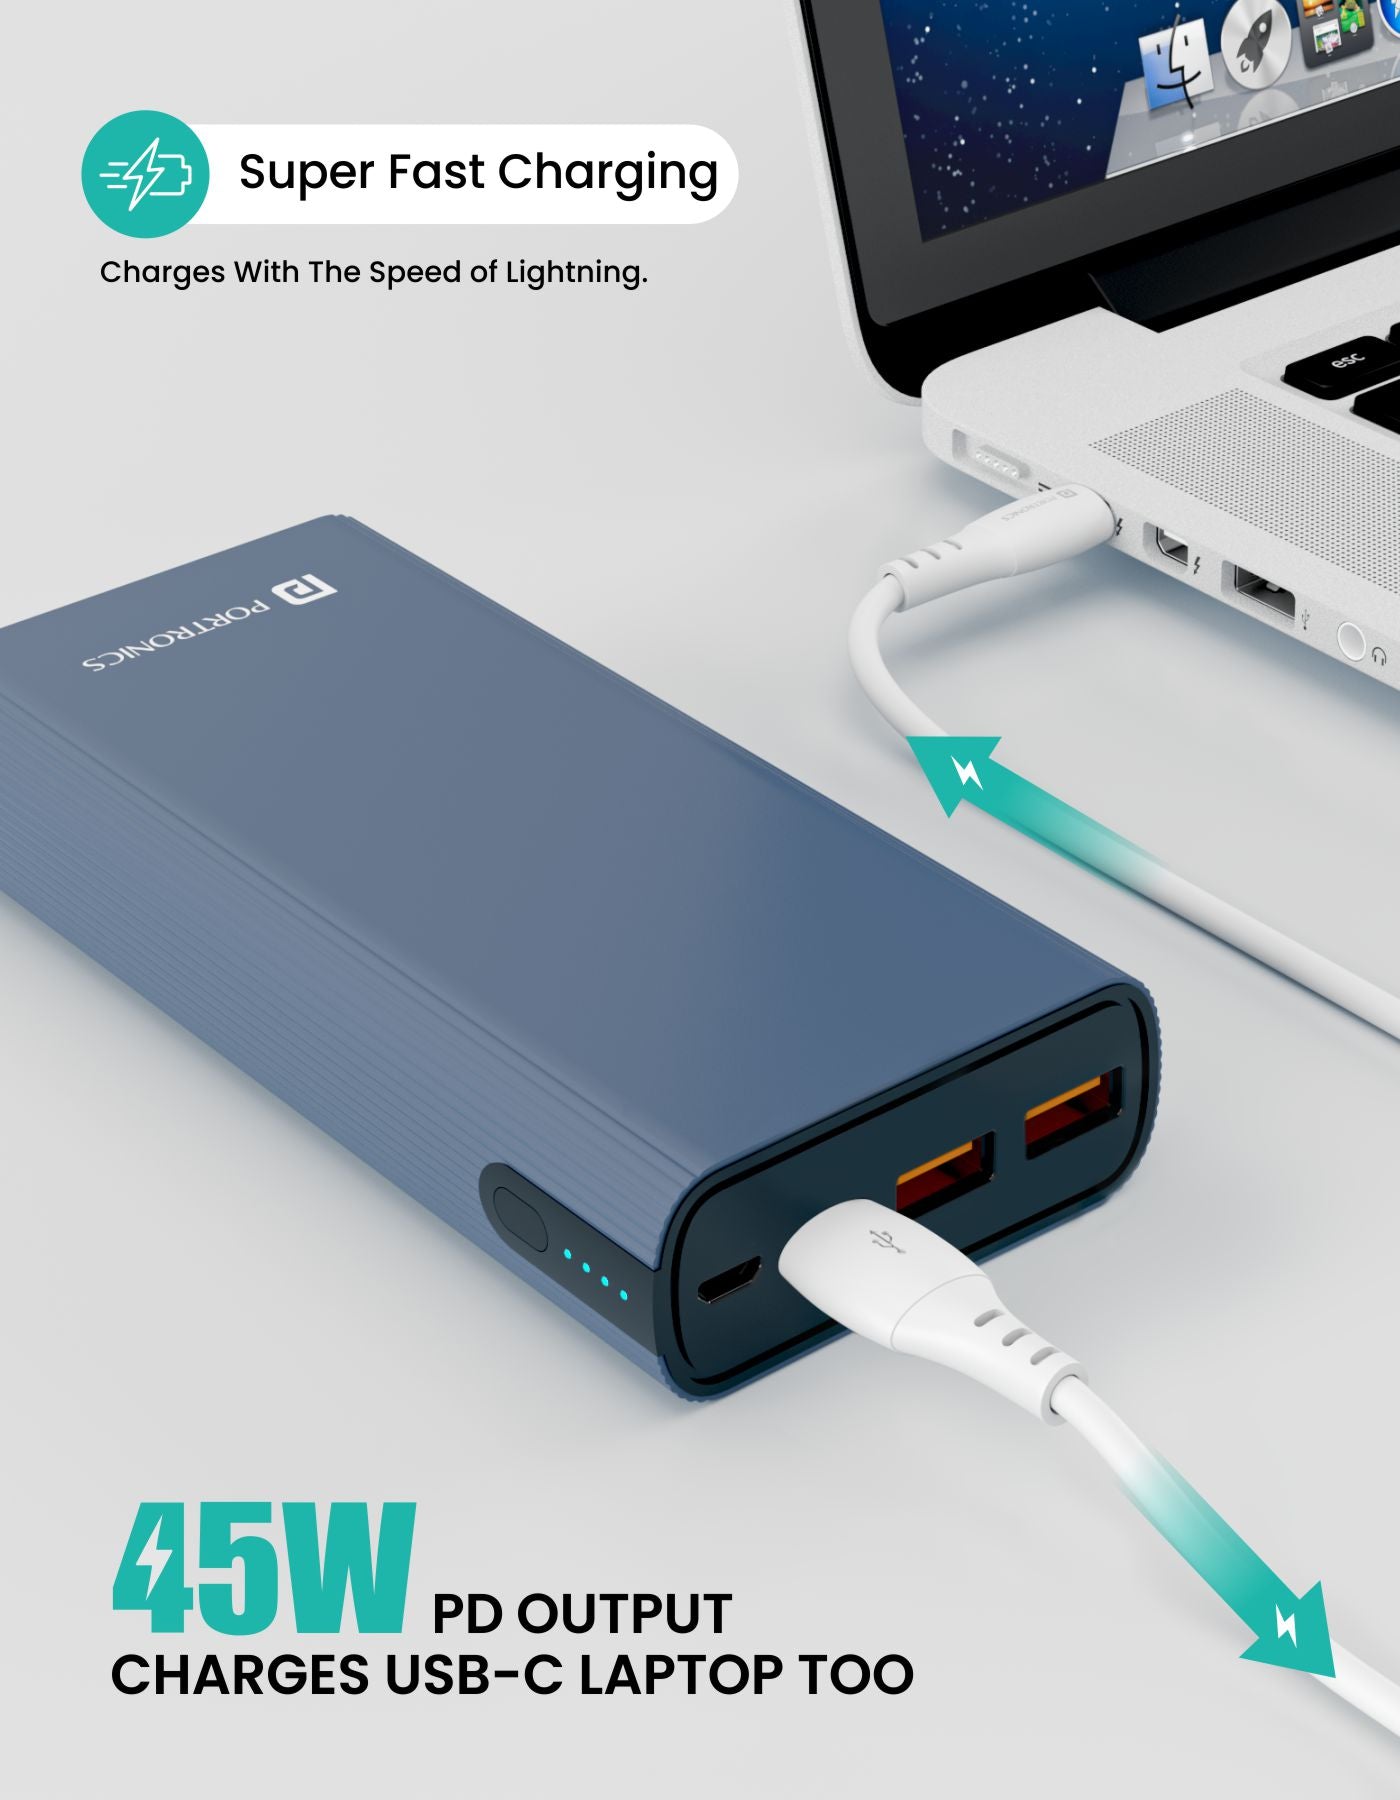 Portronics POWER 45 Power bank 20000mah 45W PD output super Fast Charge